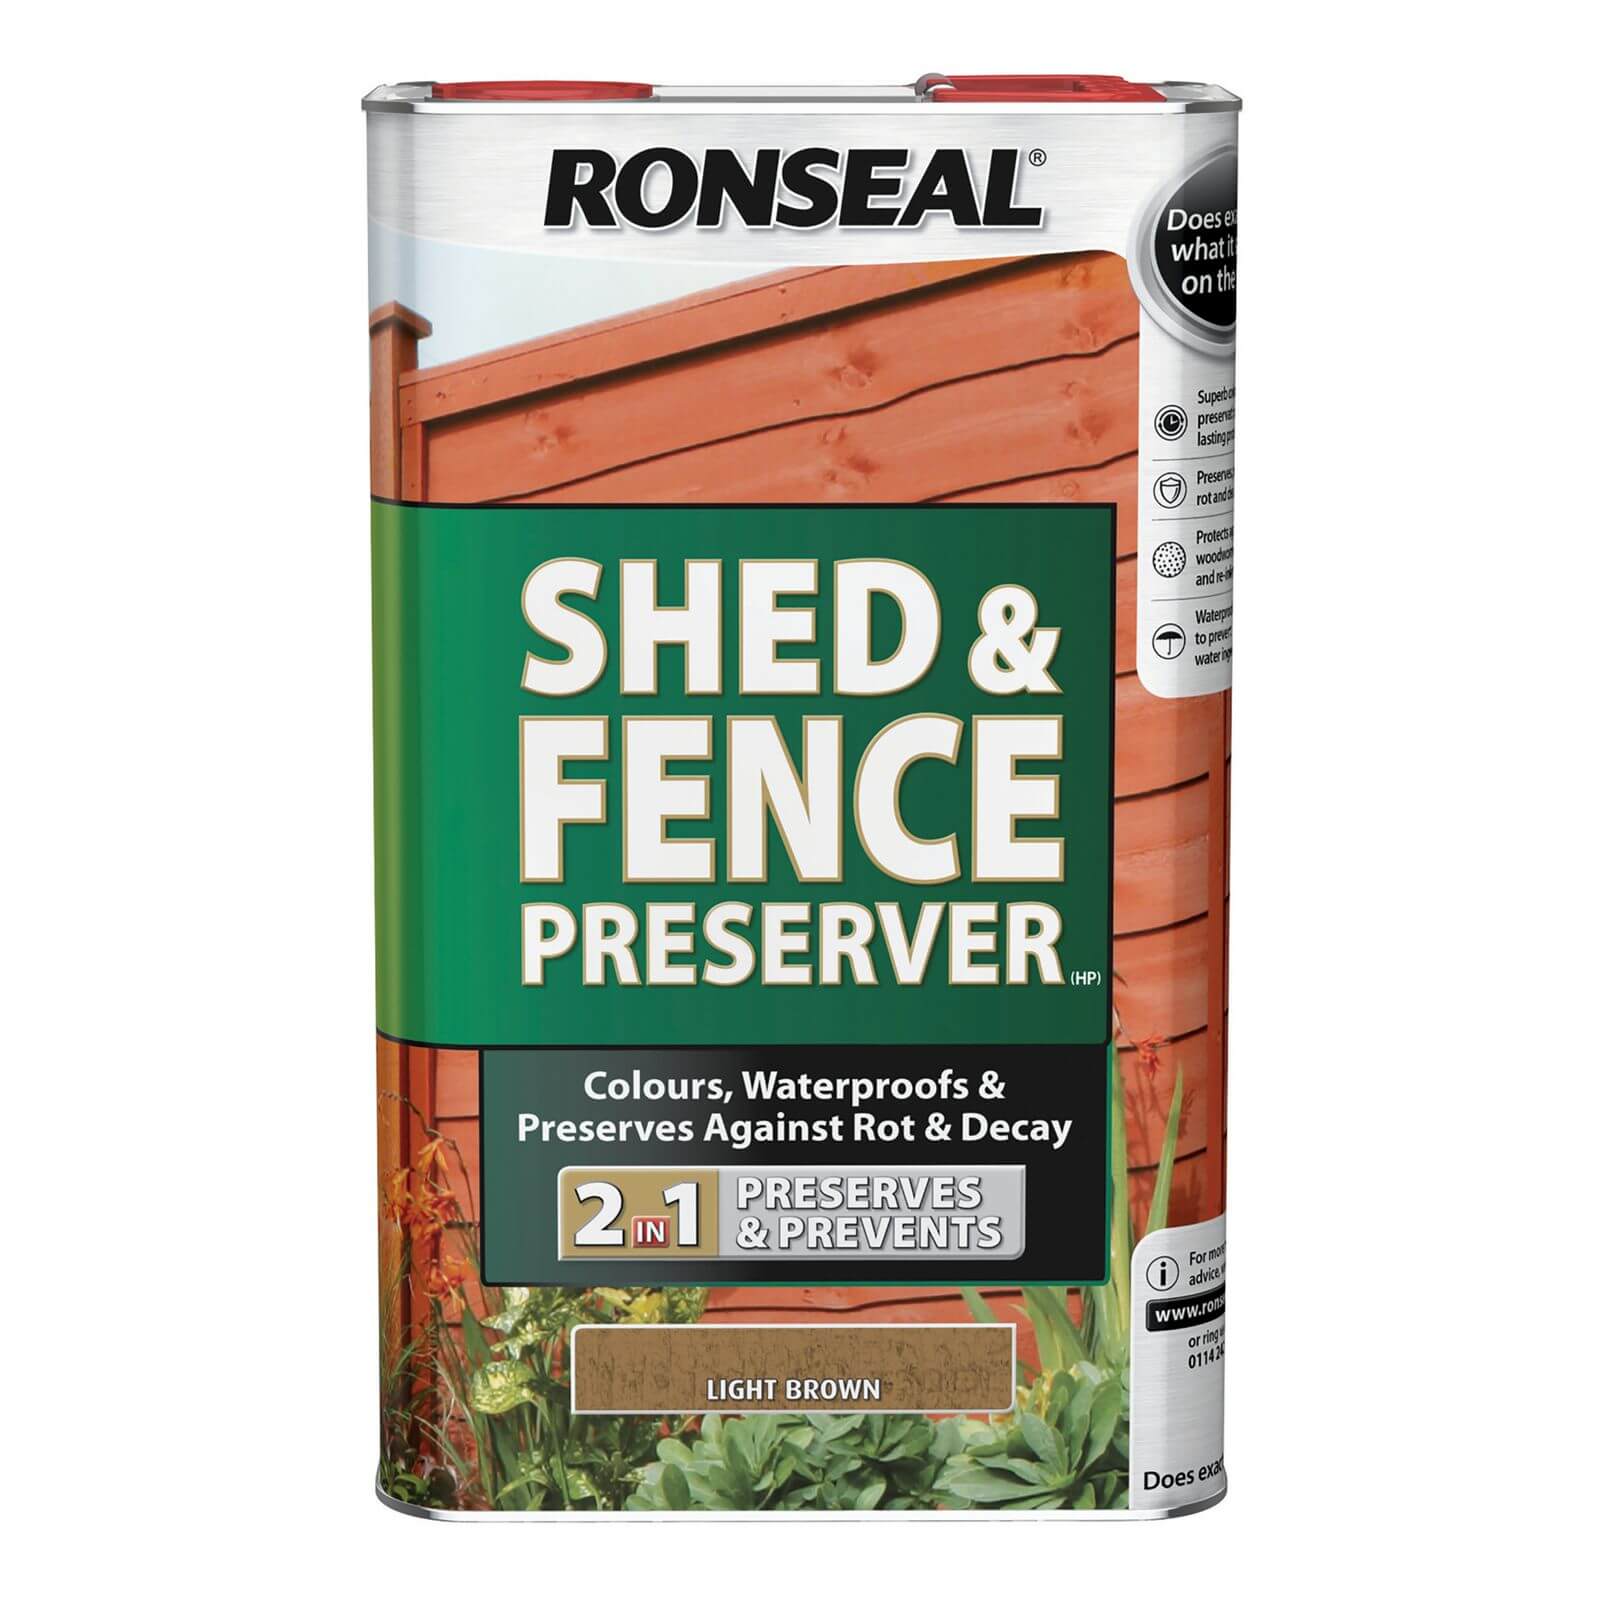 Photo of Ronseal Shed & Fence Preserver Light Brown - 5l